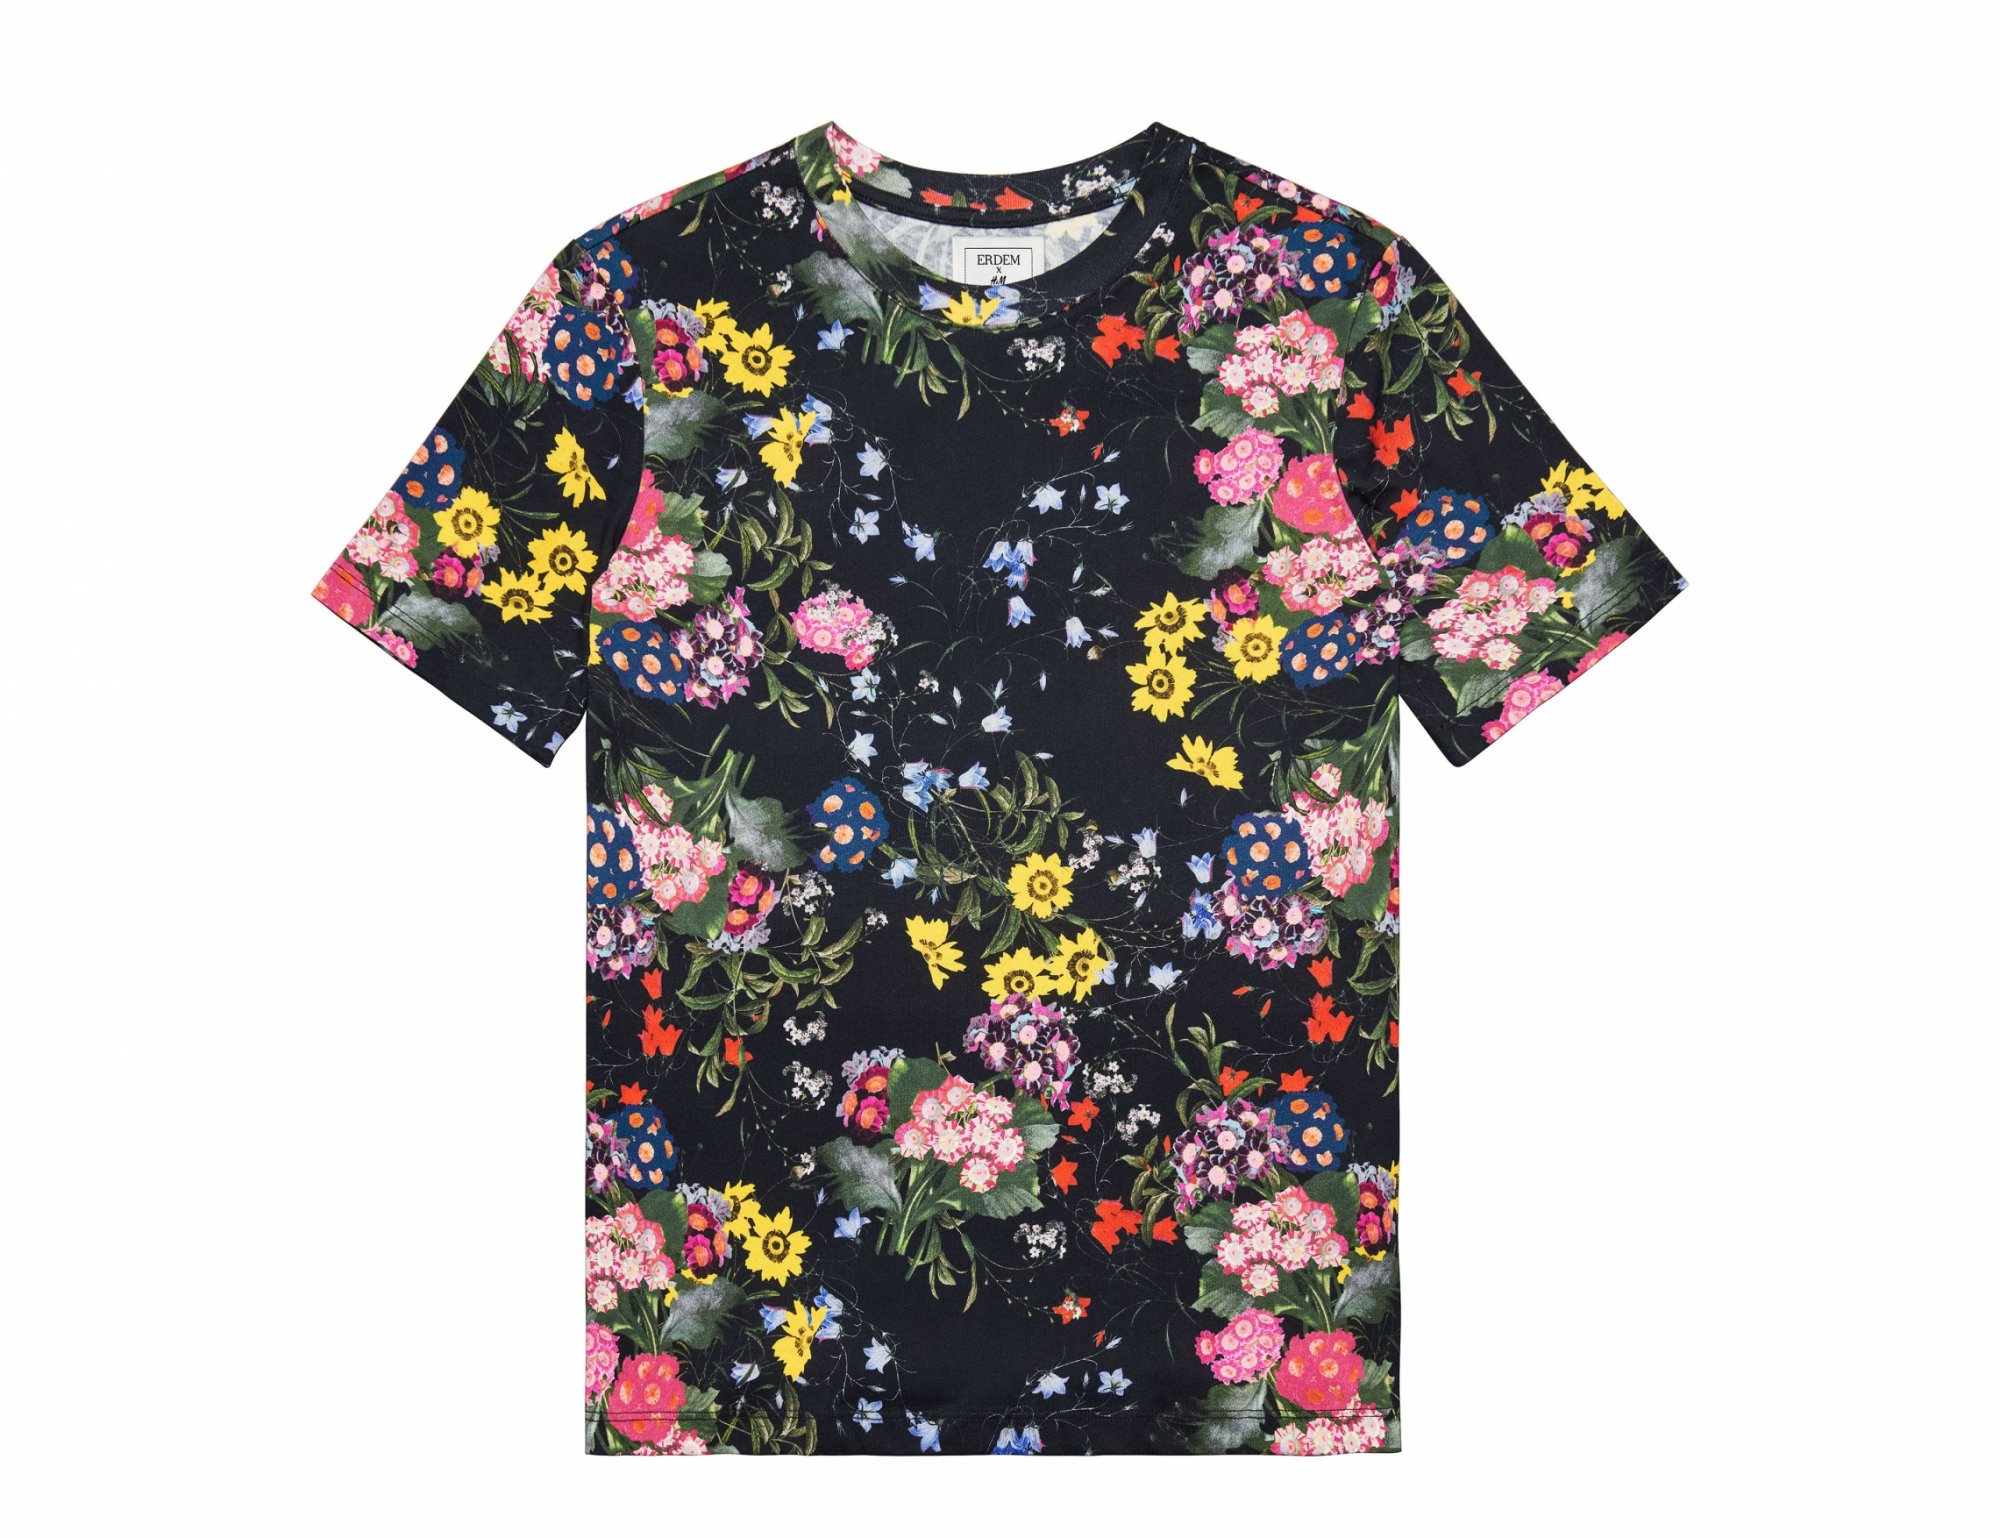 Black T-shirt with flowers